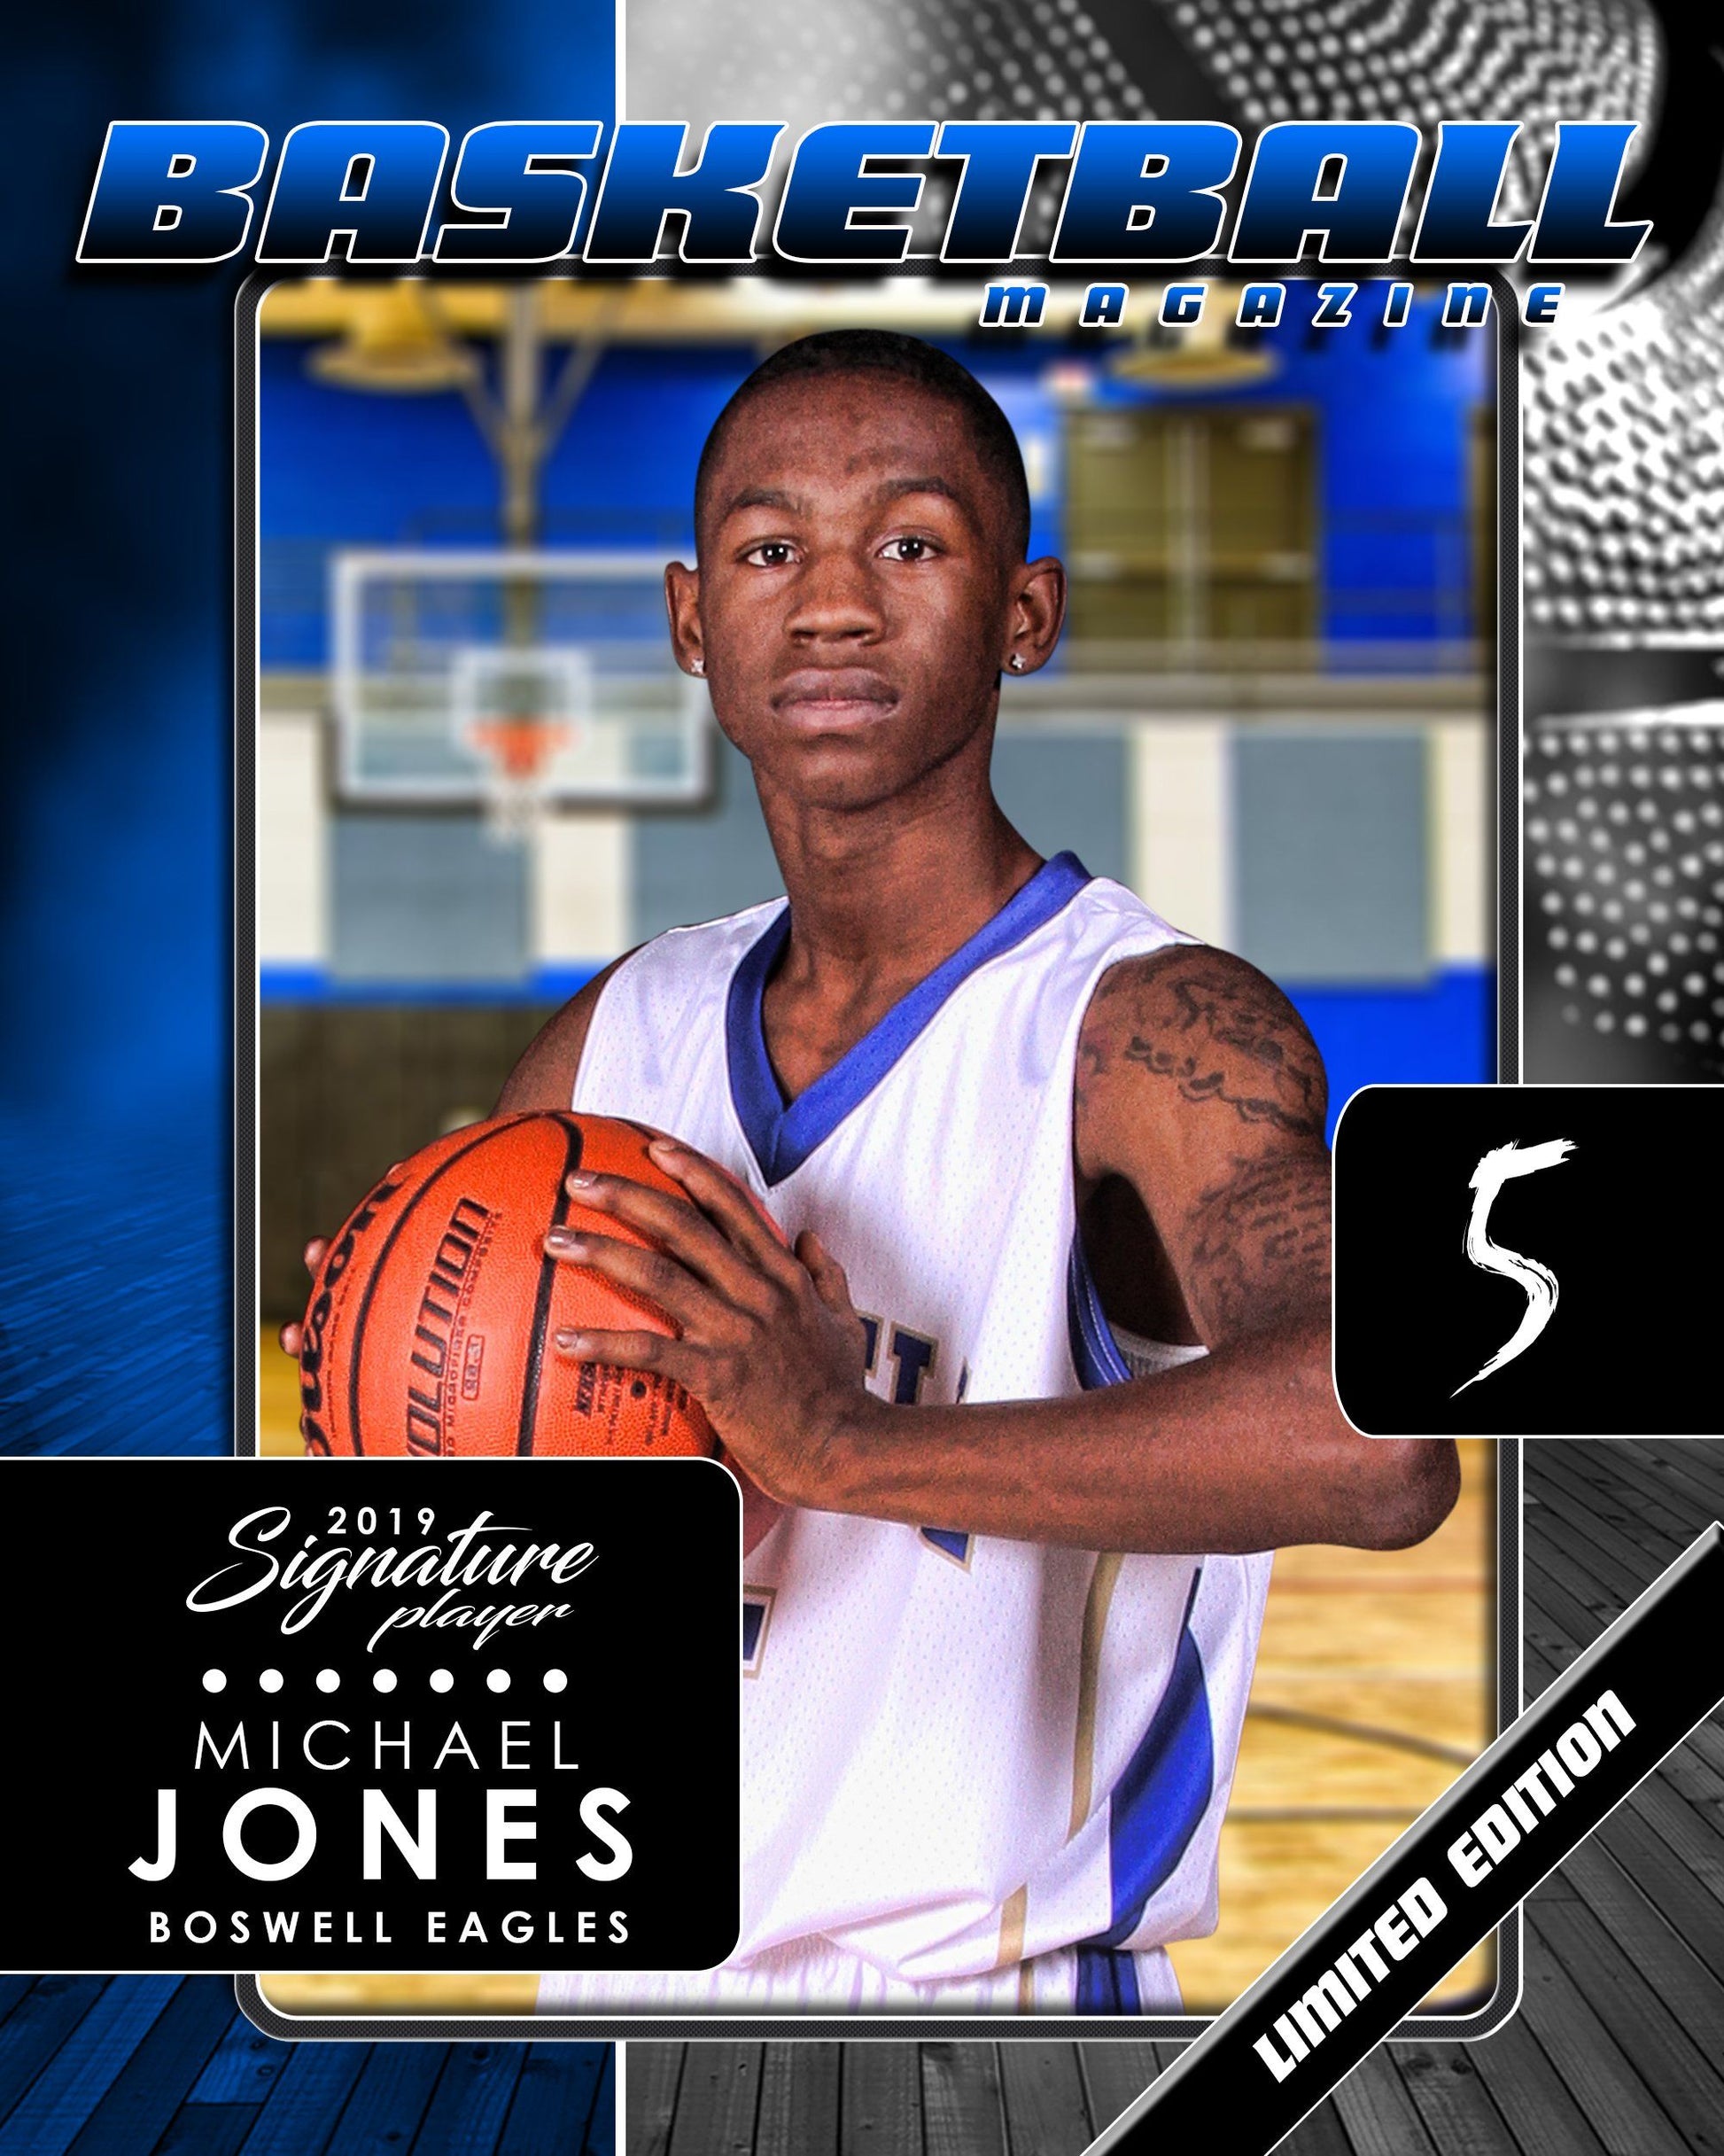 Signature Player - Basketball - V1 - Drop-In Magazine Cover Template-Photoshop Template - Photo Solutions